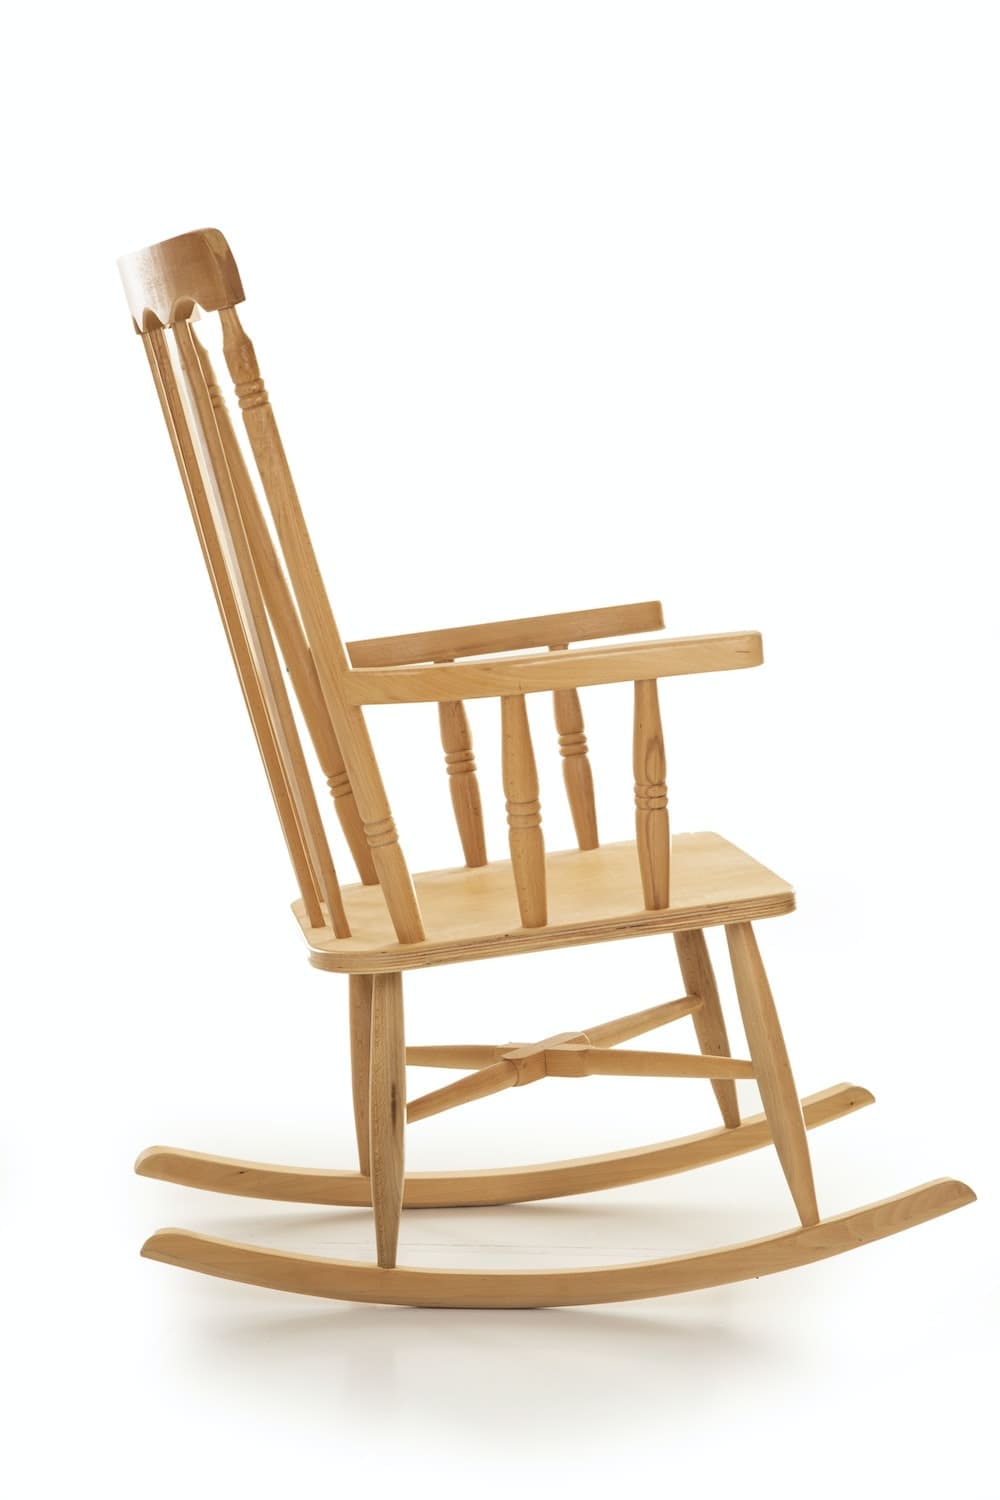 OWood Rocking Chairs